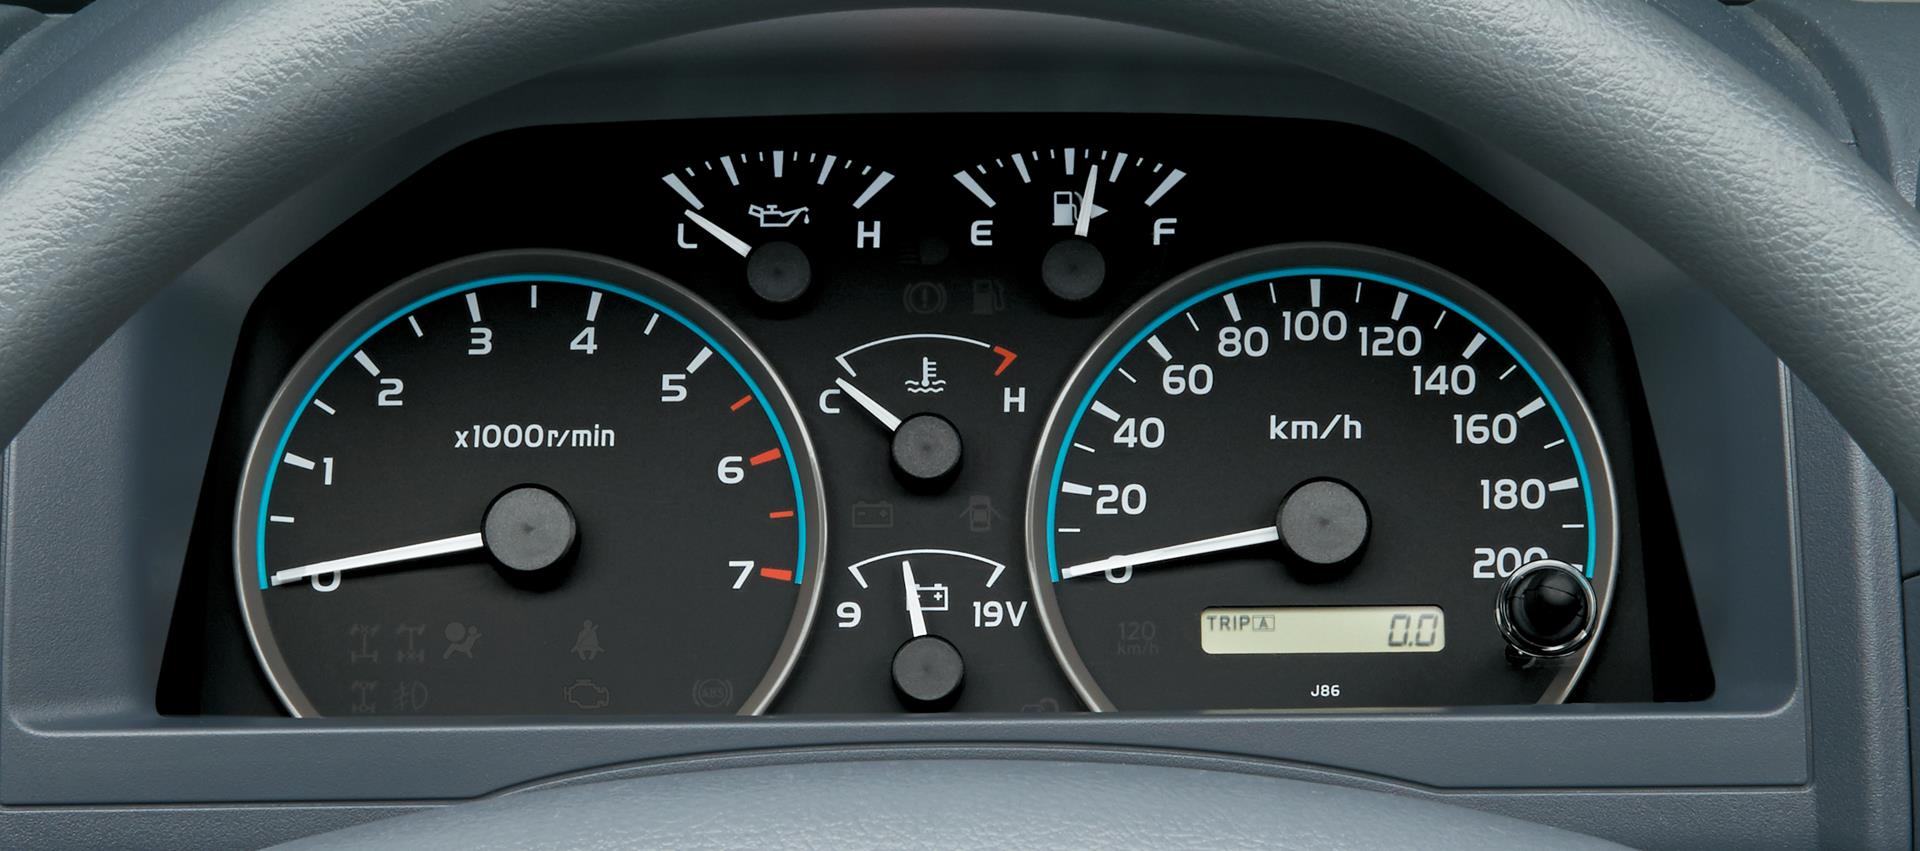 Land Cruiser 70 analog dashboard display (Japan commemorative re-release; with illumination control)